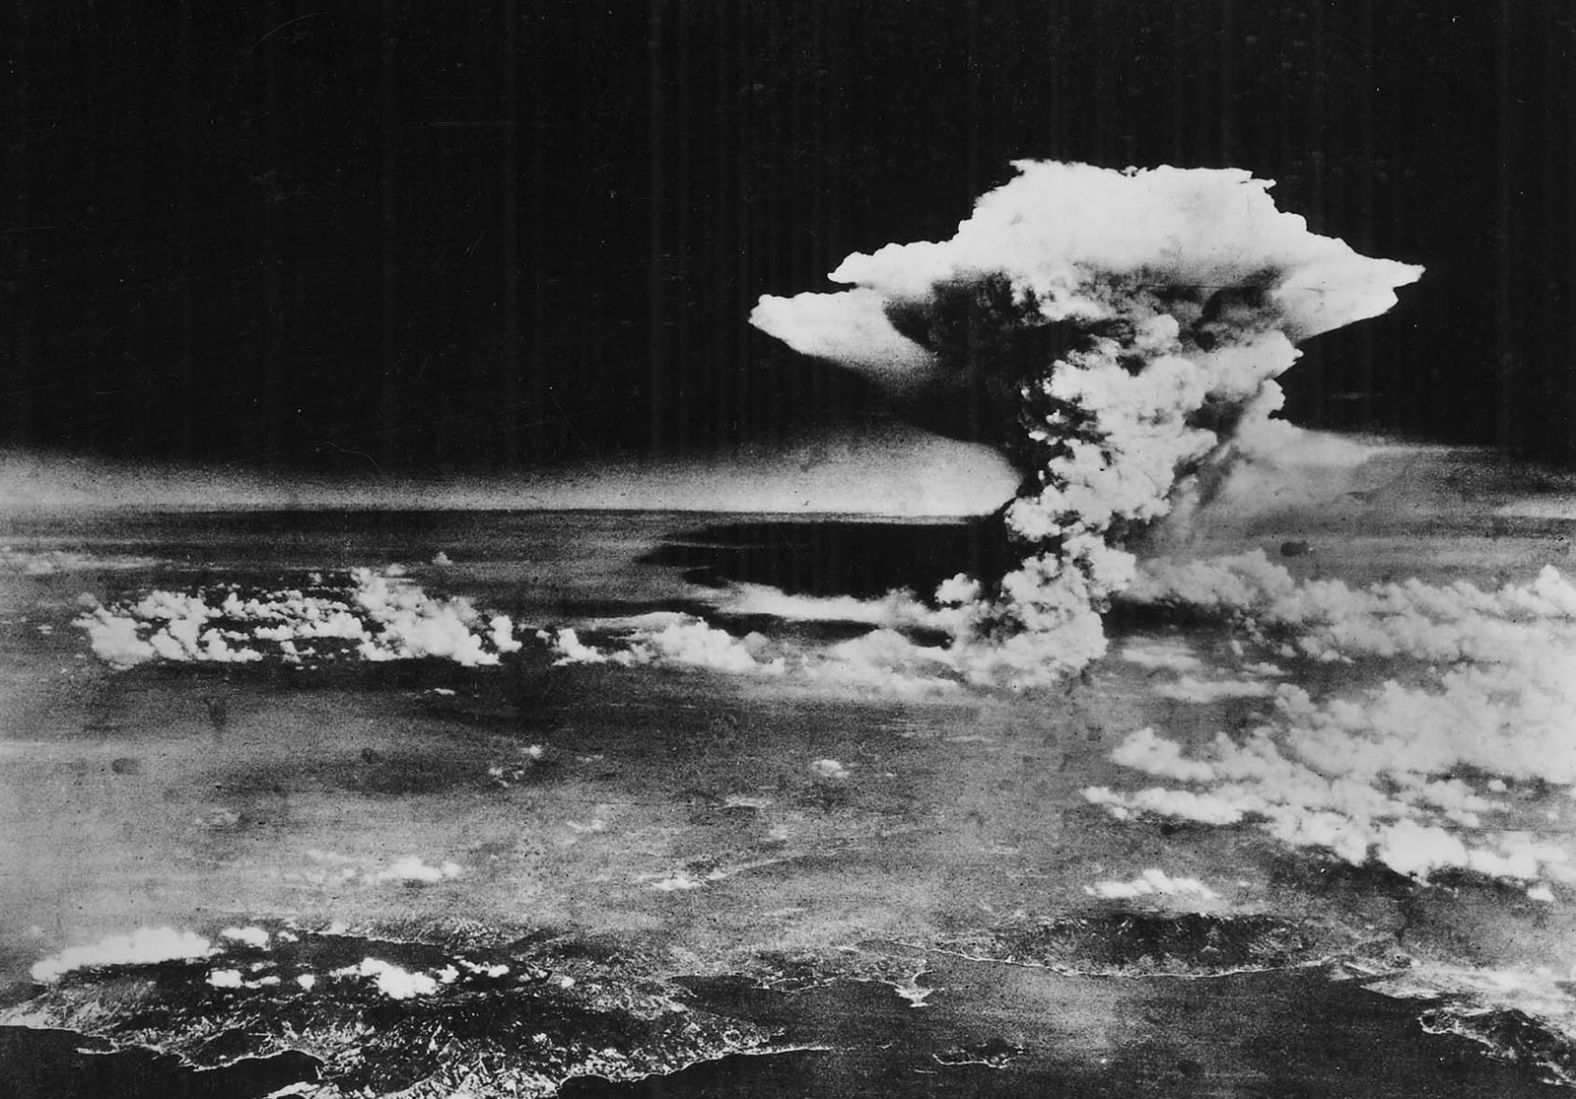 A mushroom cloud billows over Hiroshima about one hour after detonation. At least 70,000 people were killed in the initial blast, while approximately 70,000 more died from radiation exposure. "The five-year death total may have reached or even exceeded 200,000, as cancer and other long-term effects took hold," according to the Department of Energy's <a href="index.php?page=&url=https%3A%2F%2Fwww.osti.gov%2Fopennet%2Fmanhattan-project-history%2FEvents%2F1945%2Fhiroshima.htm" target="_blank" target="_blank">history of the Manhattan Project.</a>